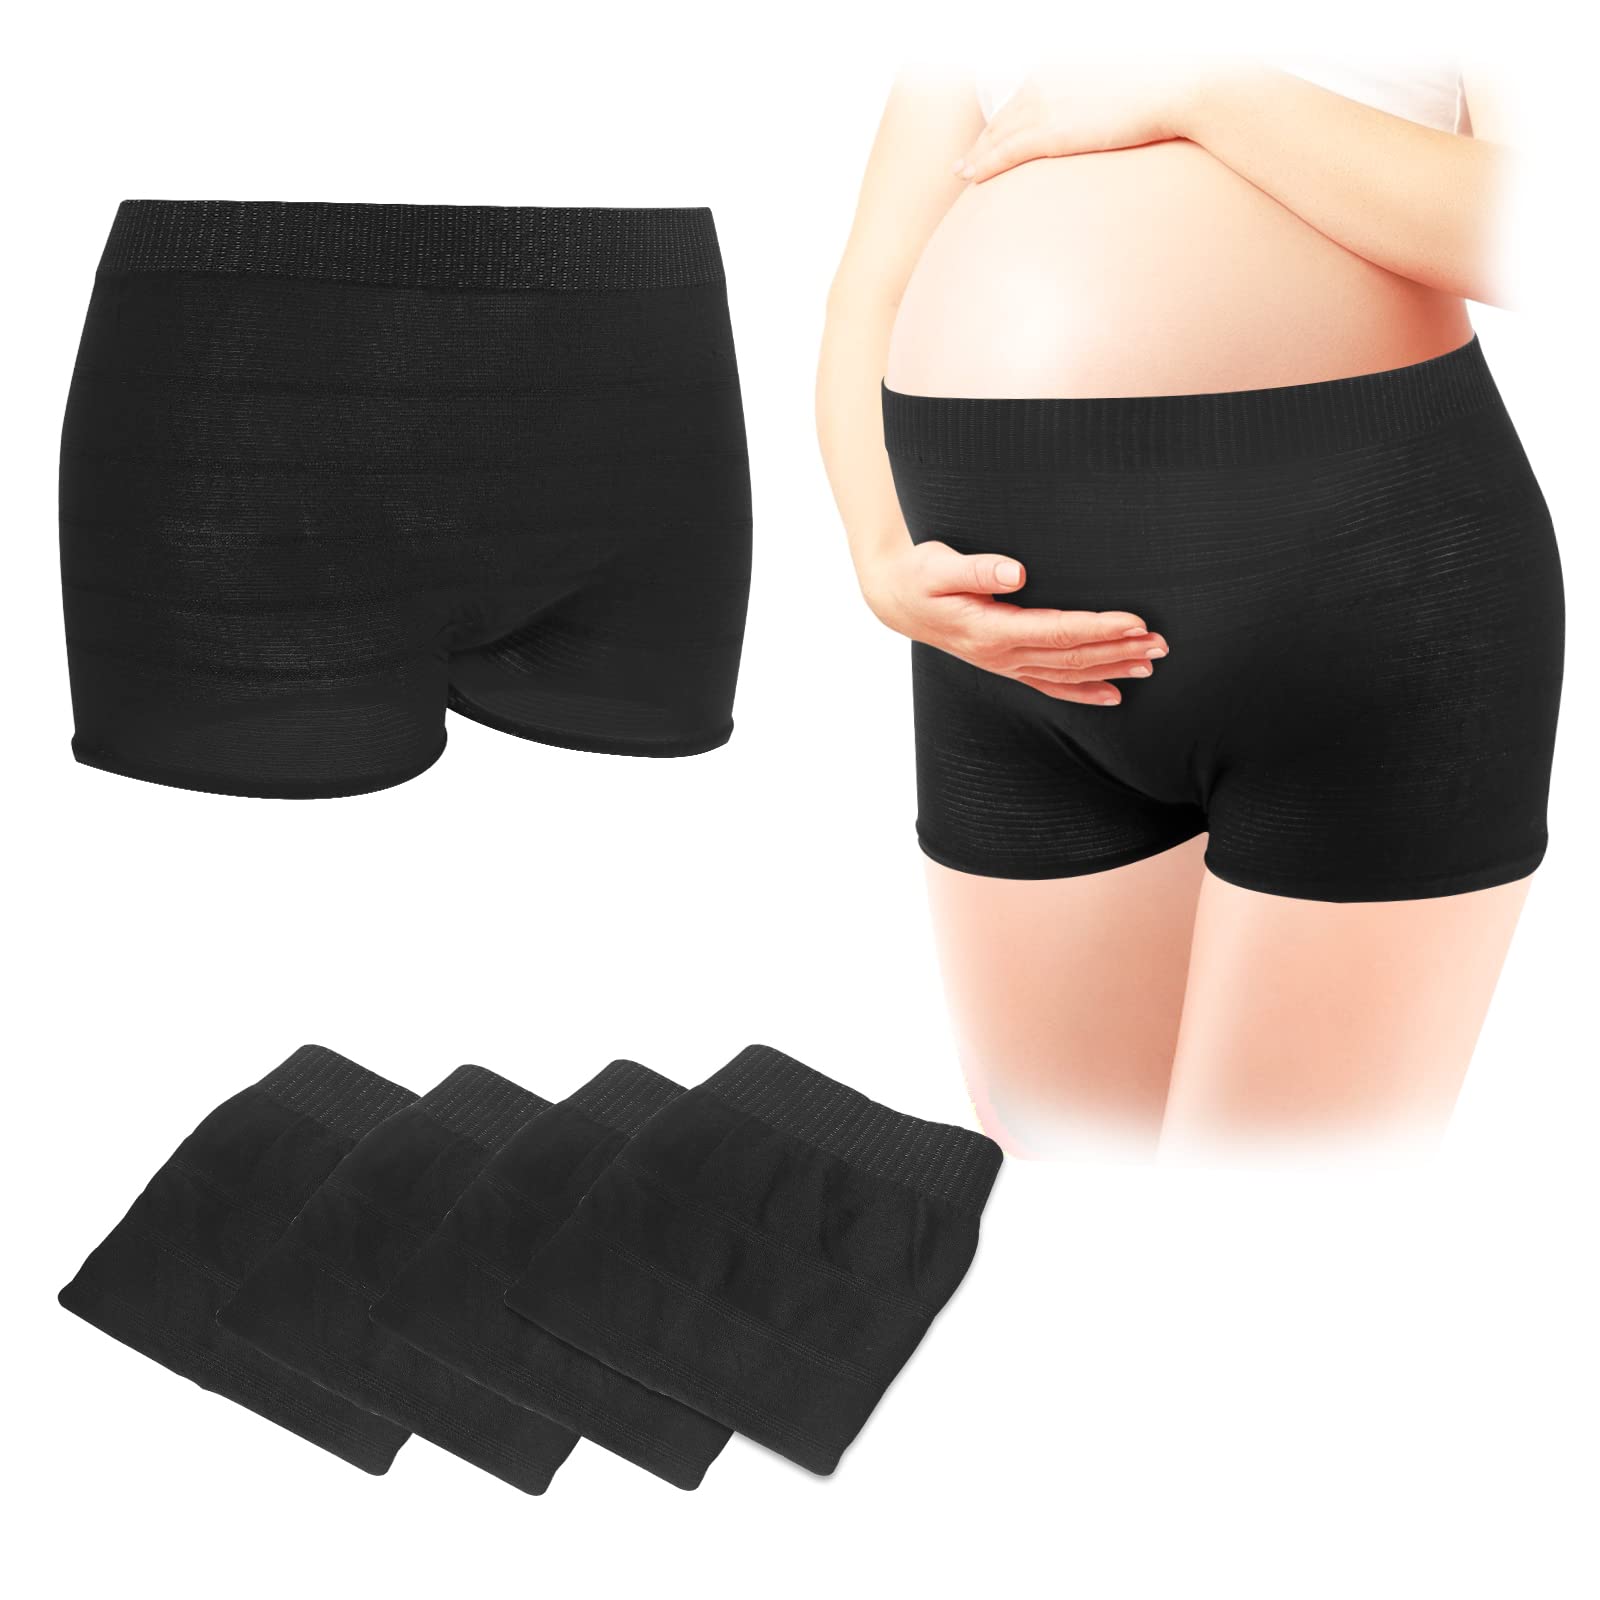 Carer Maternity Knickers 4 Pcs Disposable Pants Postpartum Underwear  Stretchable & Breathable Maternity Pants for Maternity/